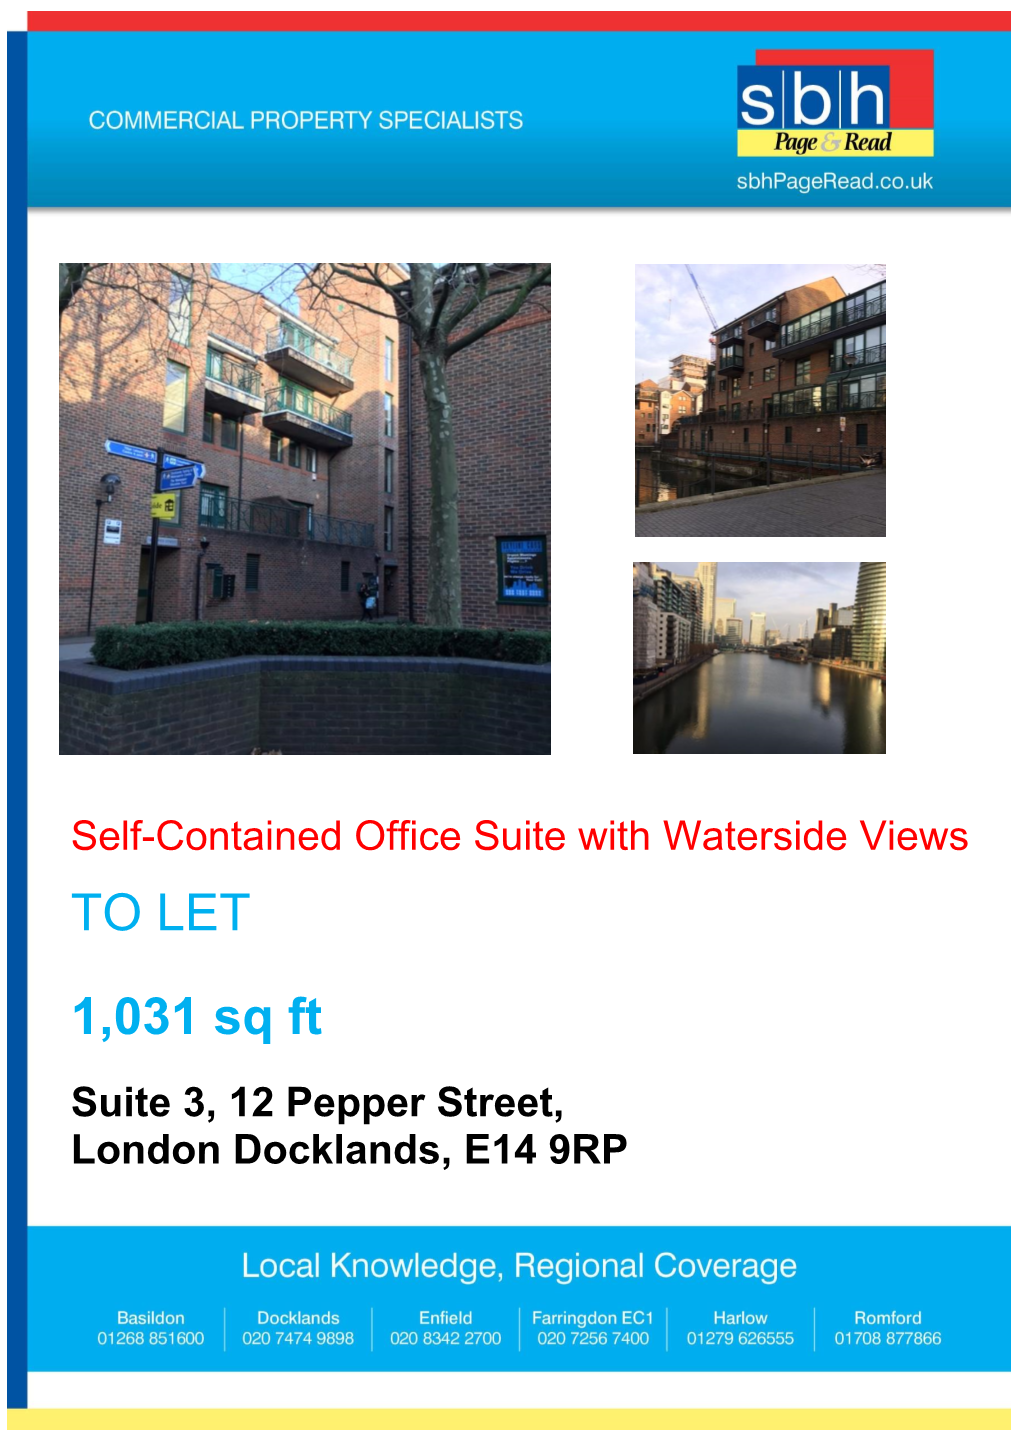 TO LET 1,031 Sq Ft